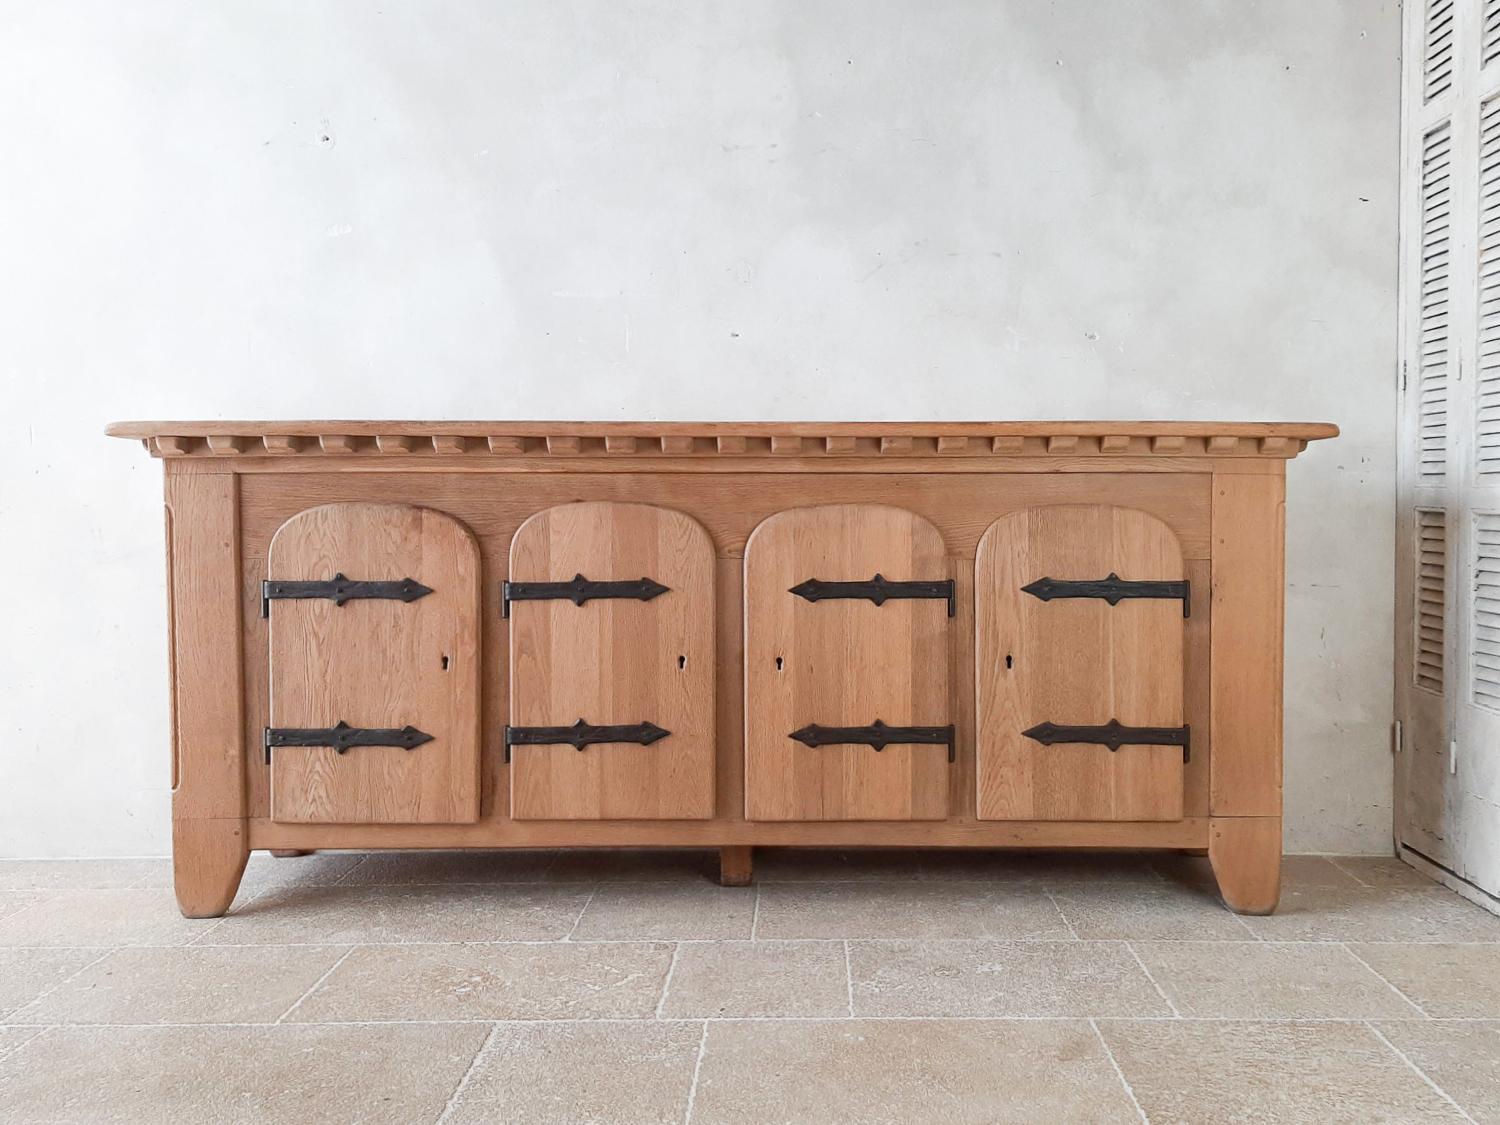 Mid 20th Century Spanish Oak credenza from the 1940s. Stunning solid oak sideboard with typical arched doors and large wrought iron hinges. With wood pattern underneath the top all the way around the front and sides. The three left doors have a